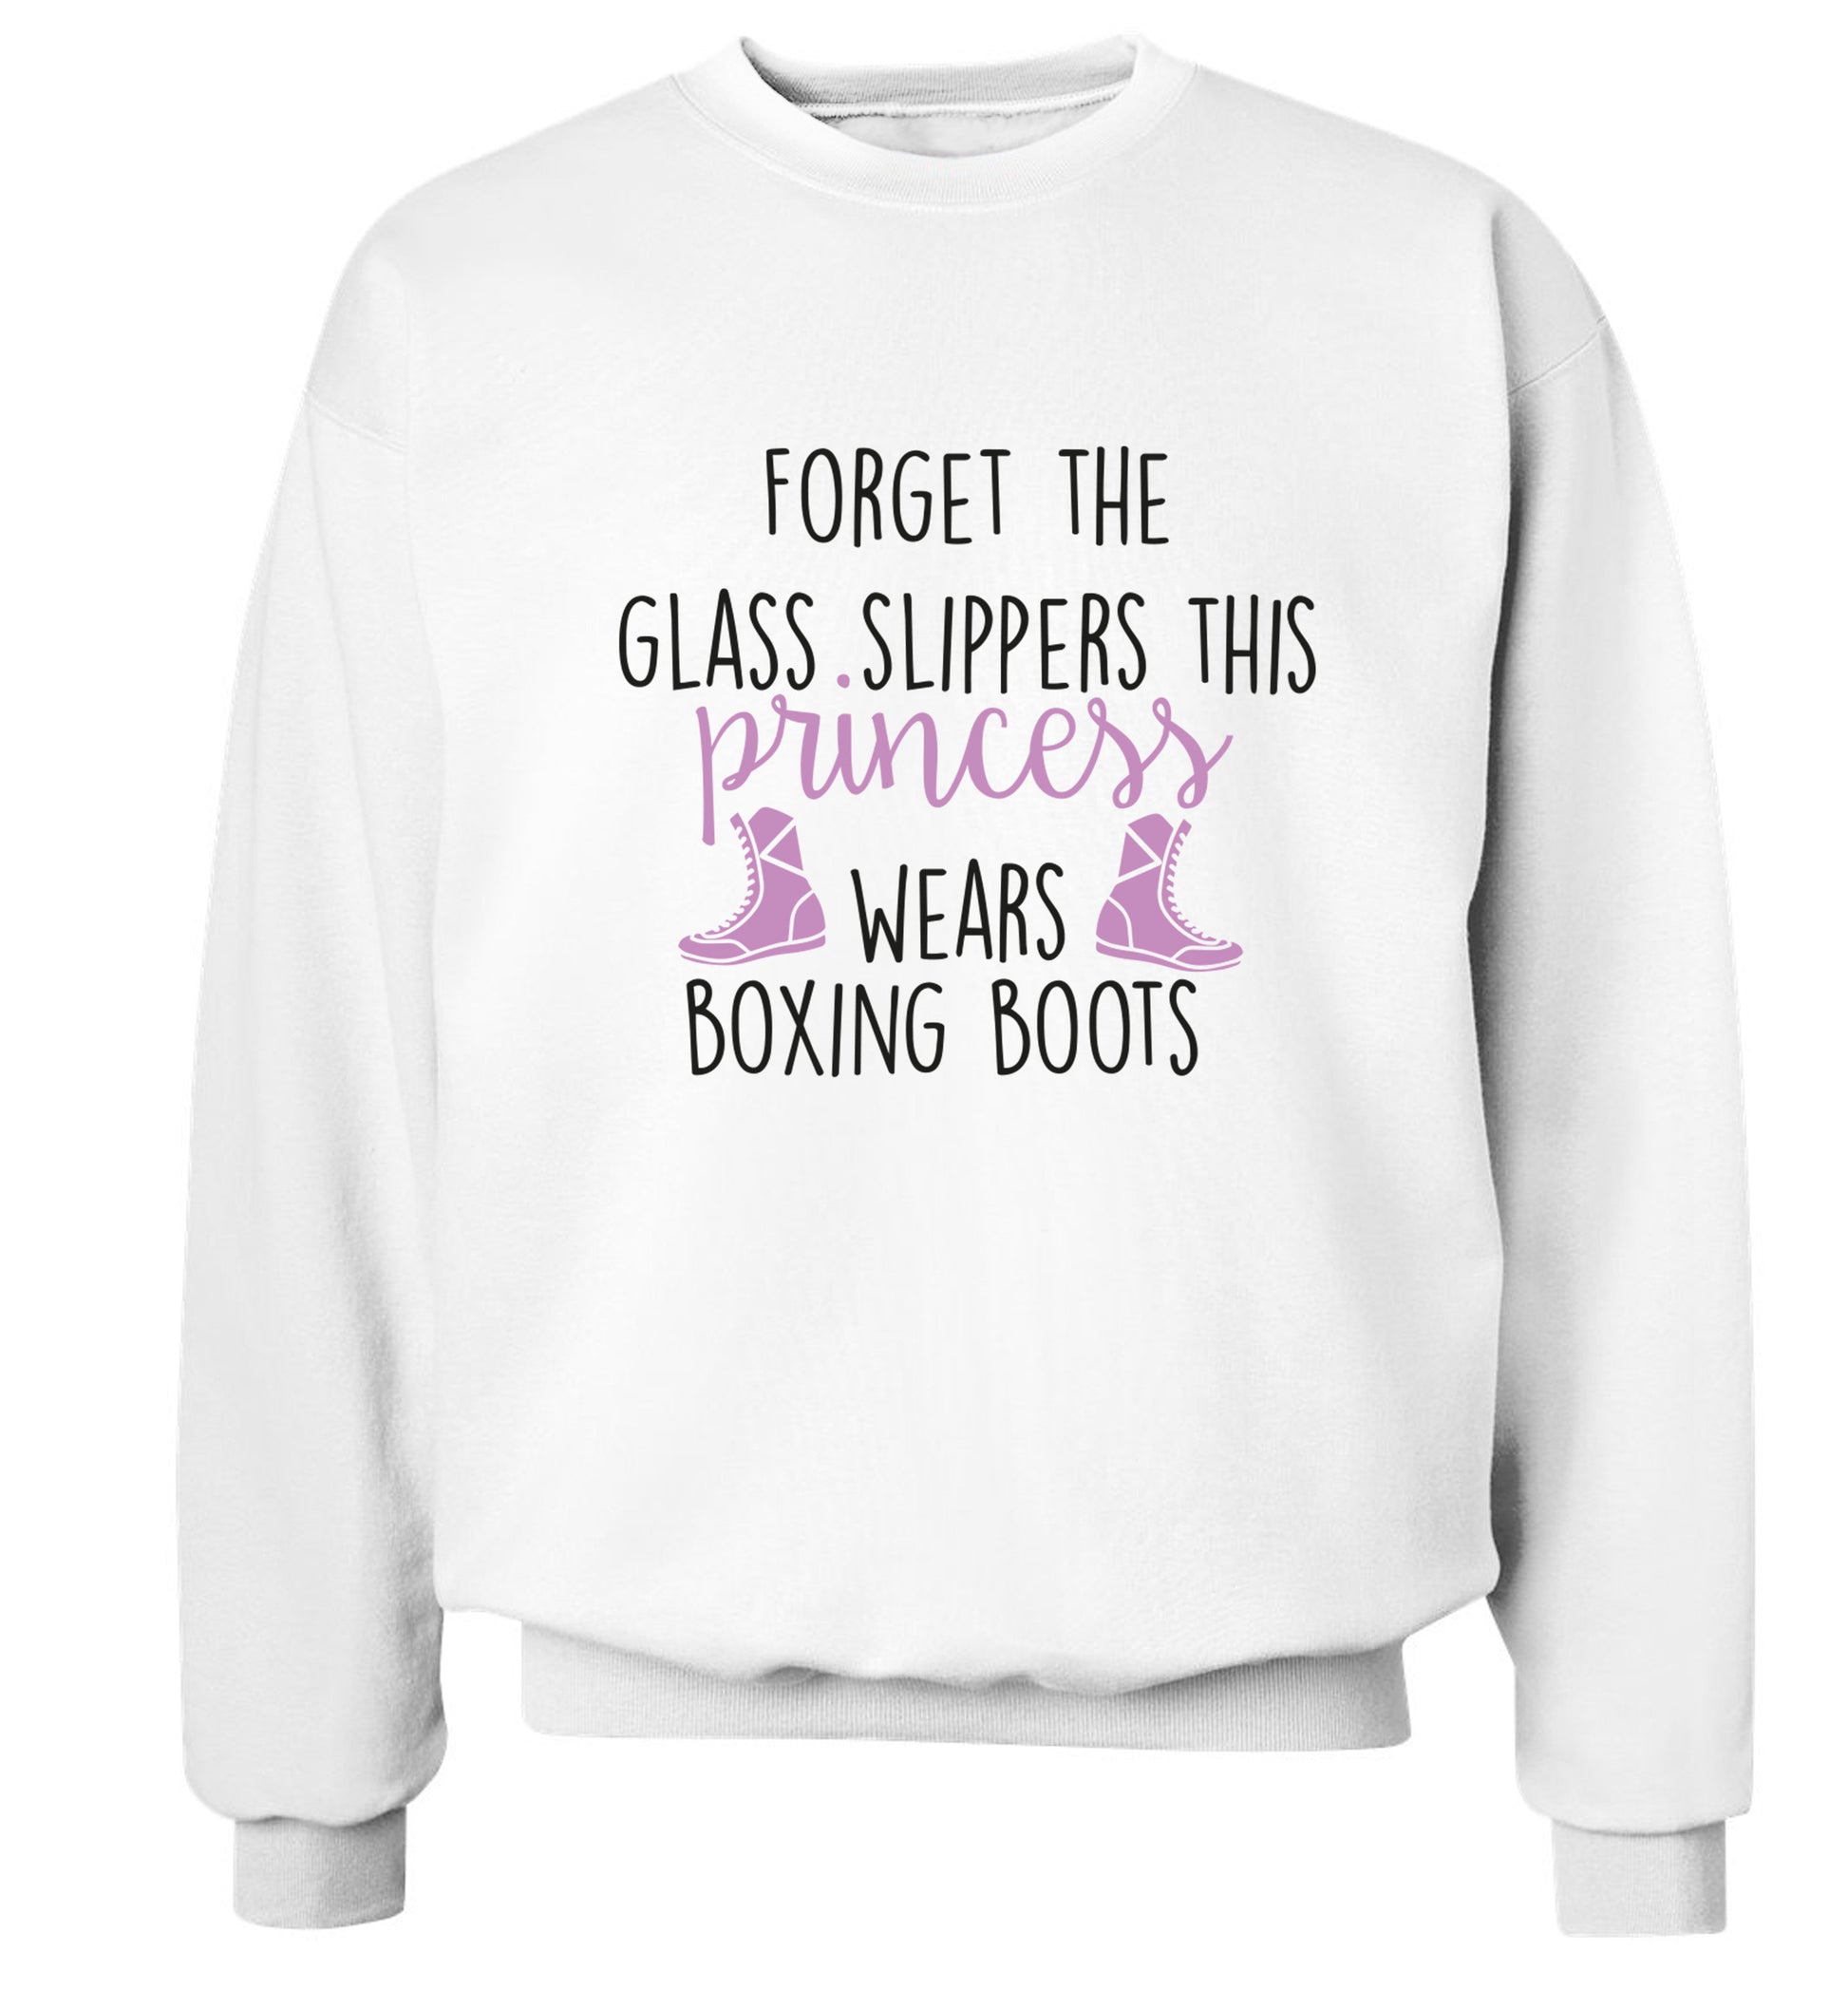 Forget the glass slippers this princess wears boxing boots Adult's unisex white Sweater 2XL